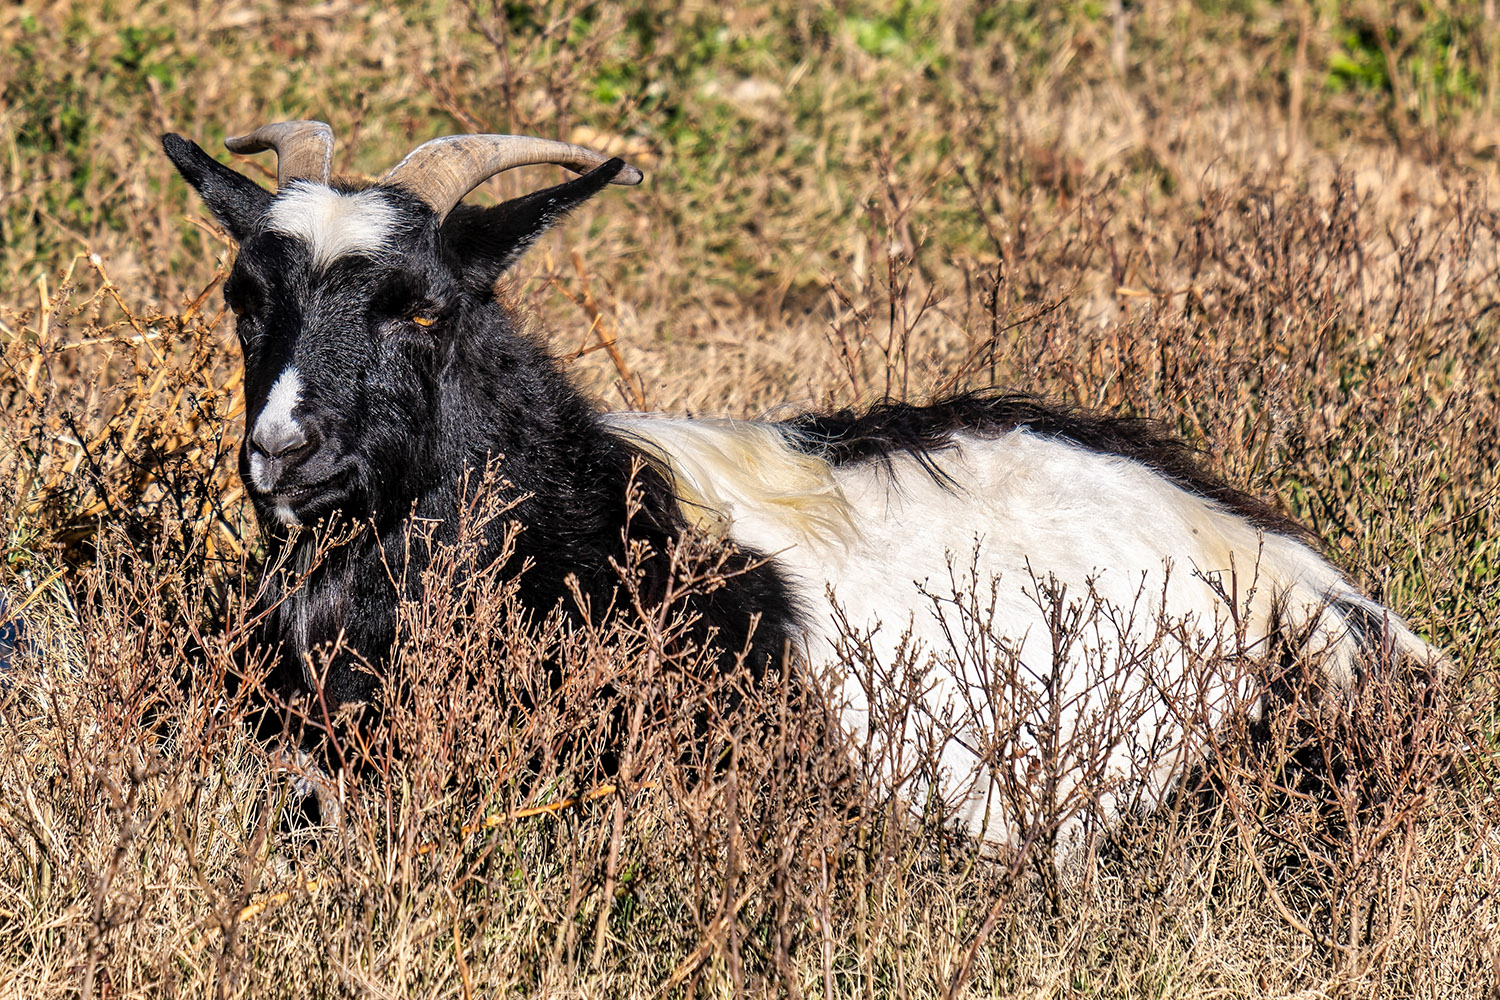 A black-and-white Tennessee fainting goat. Fainting goats do not really faint but stiffen when startled.